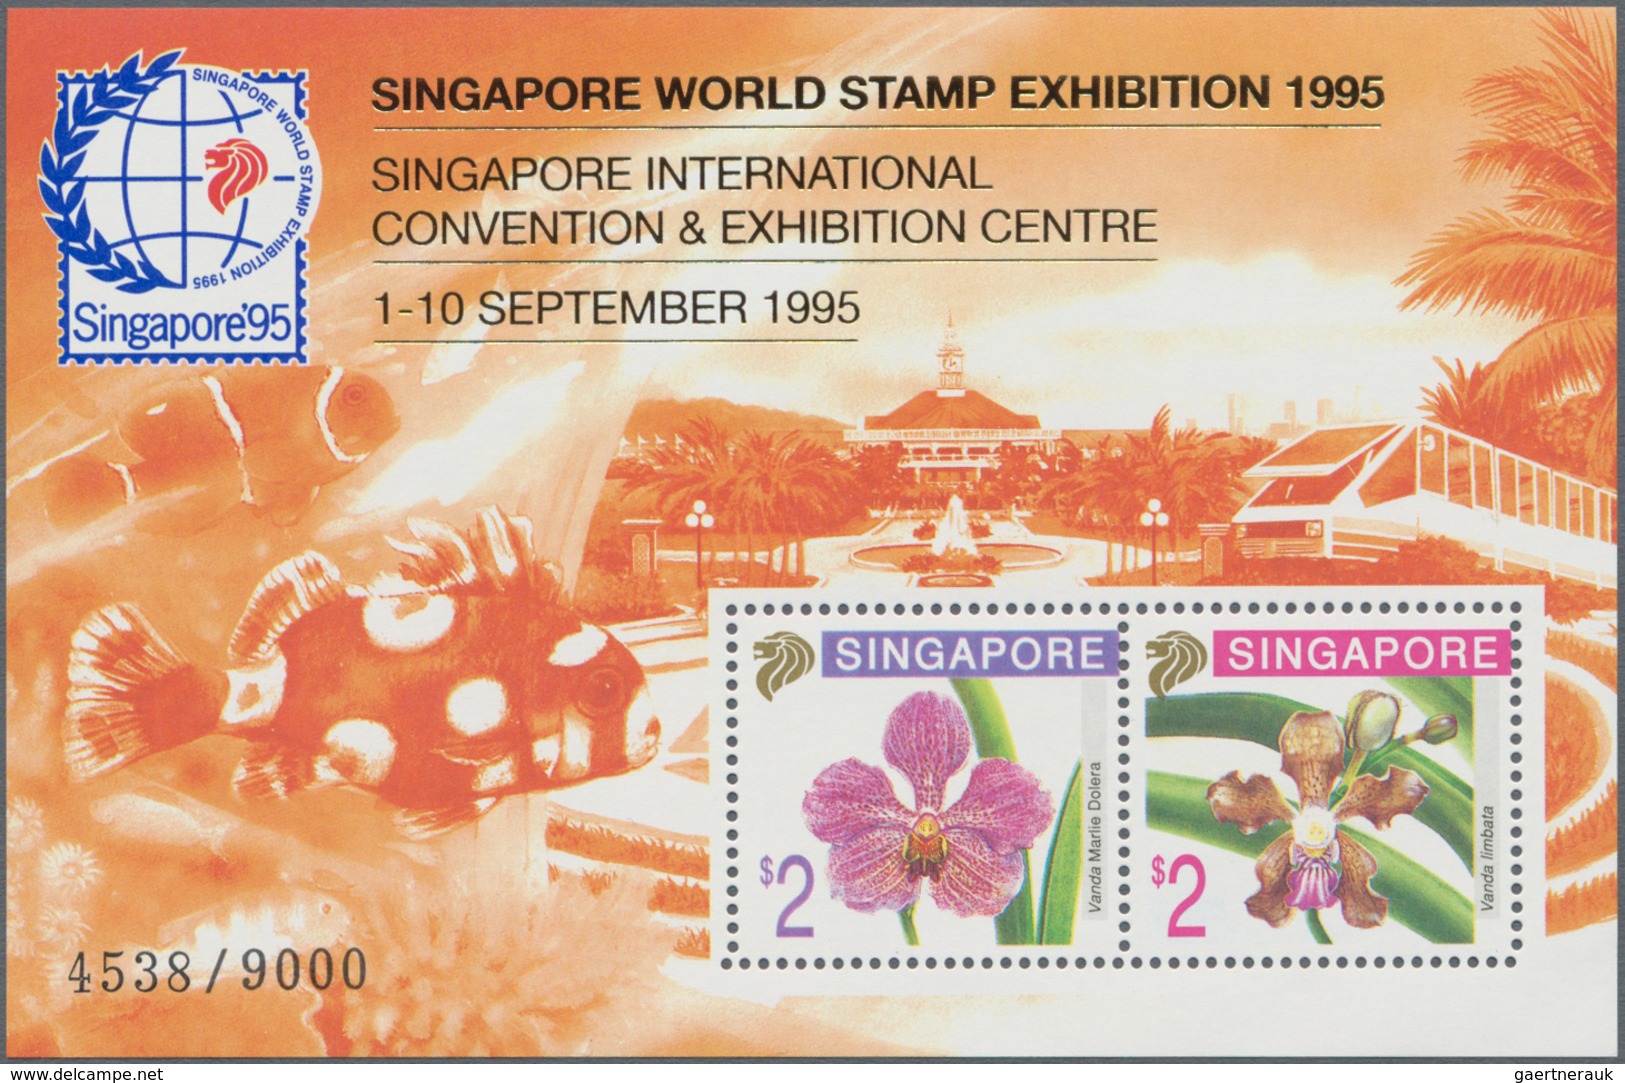 Singapur: 1940's-2000's: Accumulation of several hundred stamps and miniature sheets, especially 10